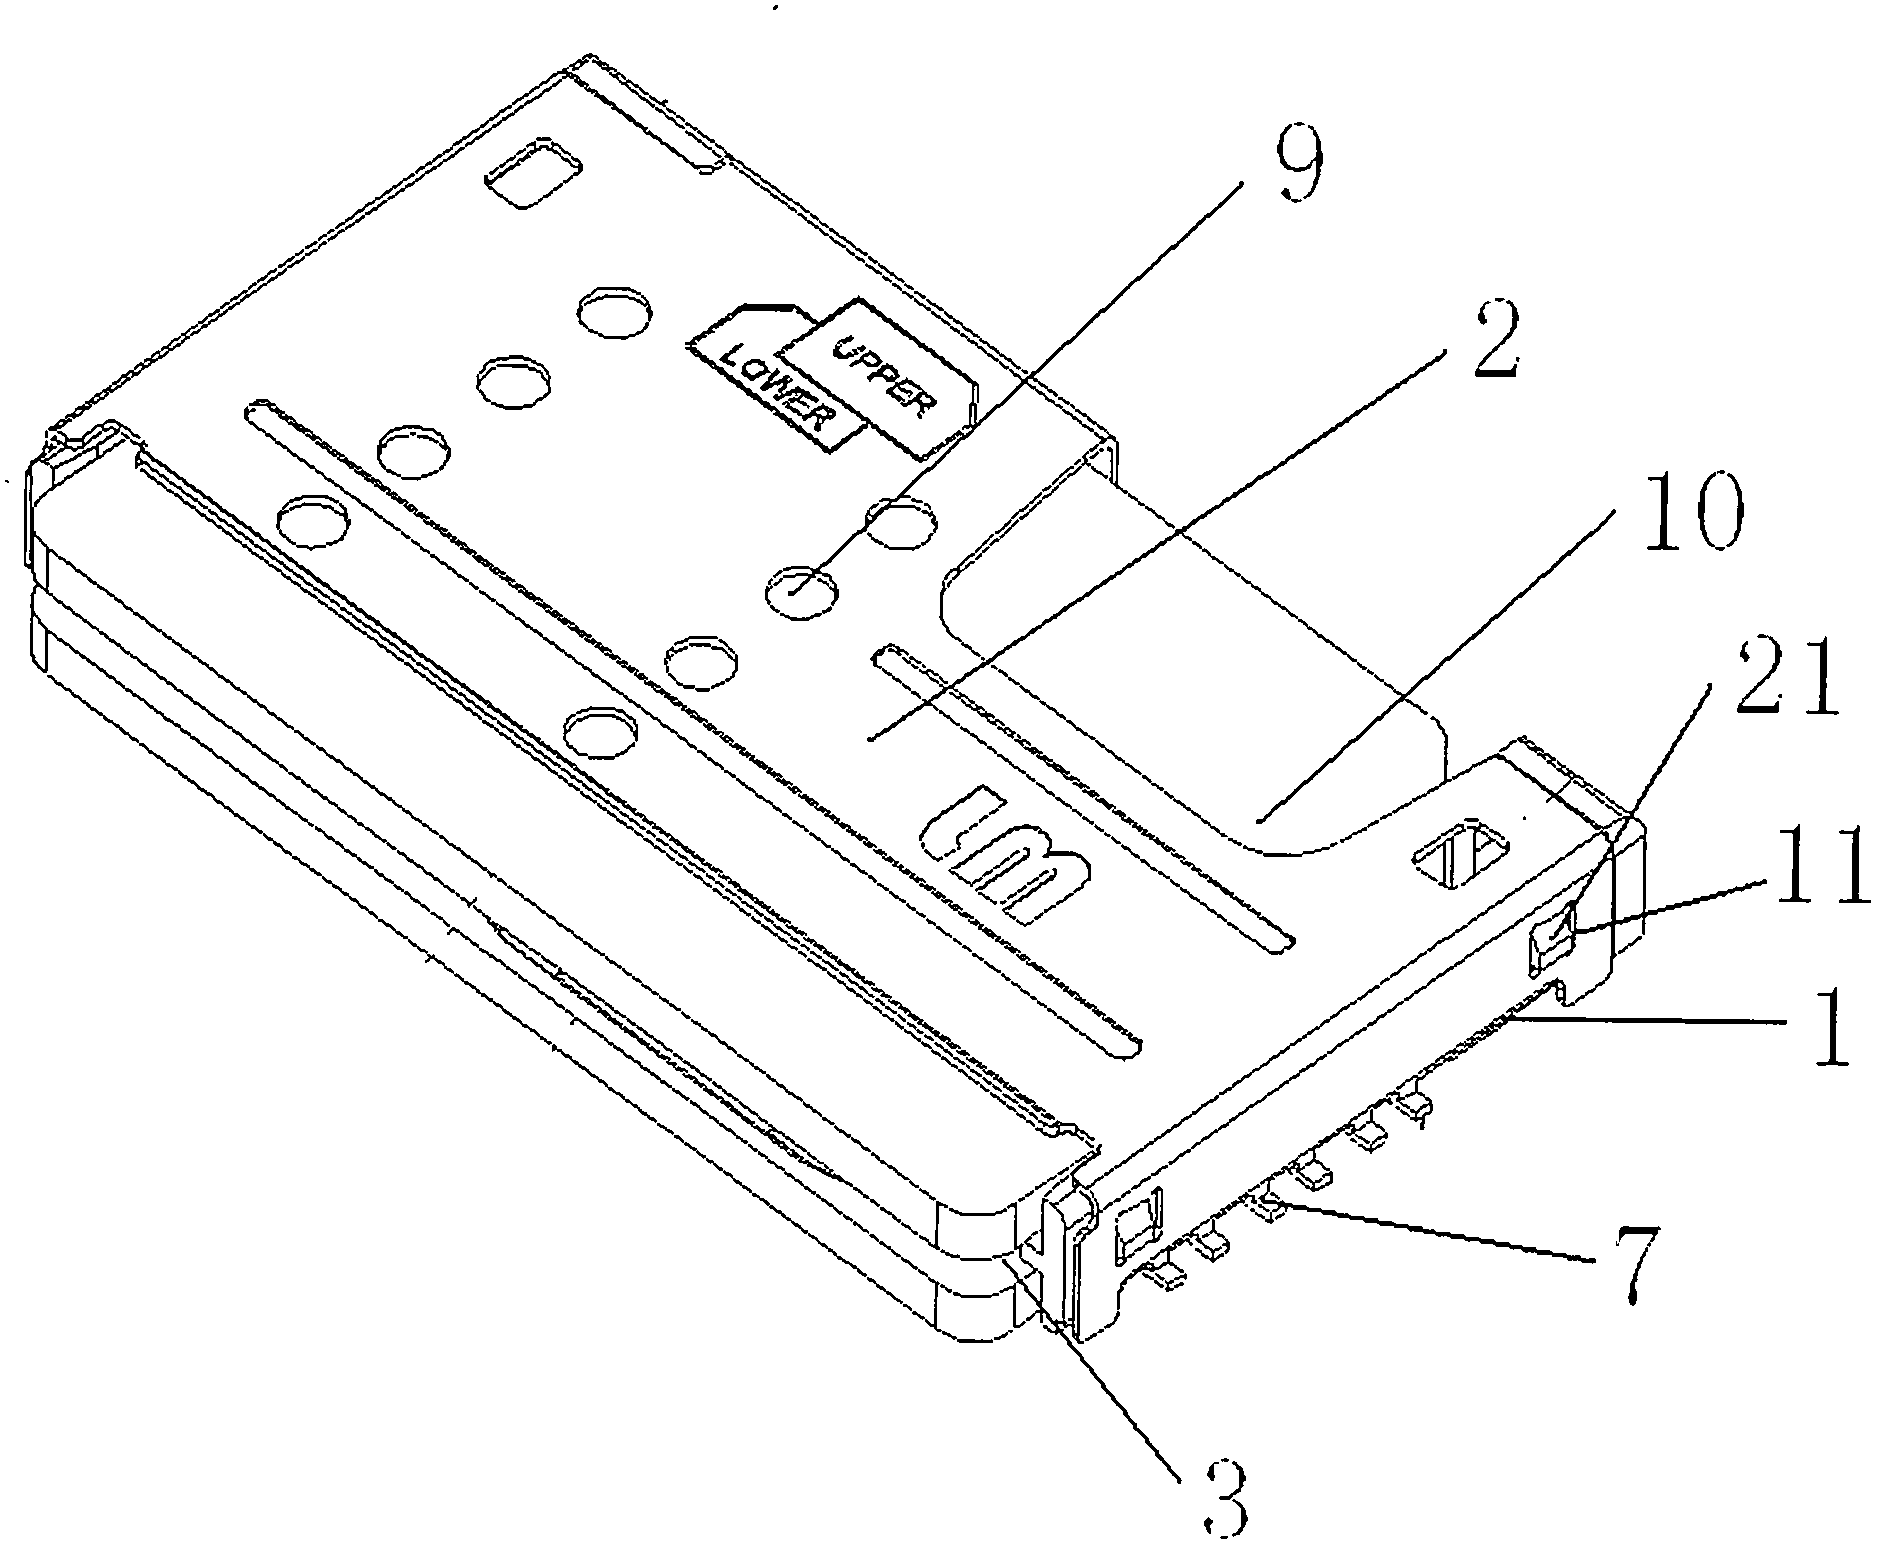 Side-inserting double-layer SIM (subscriber identity module) card socket